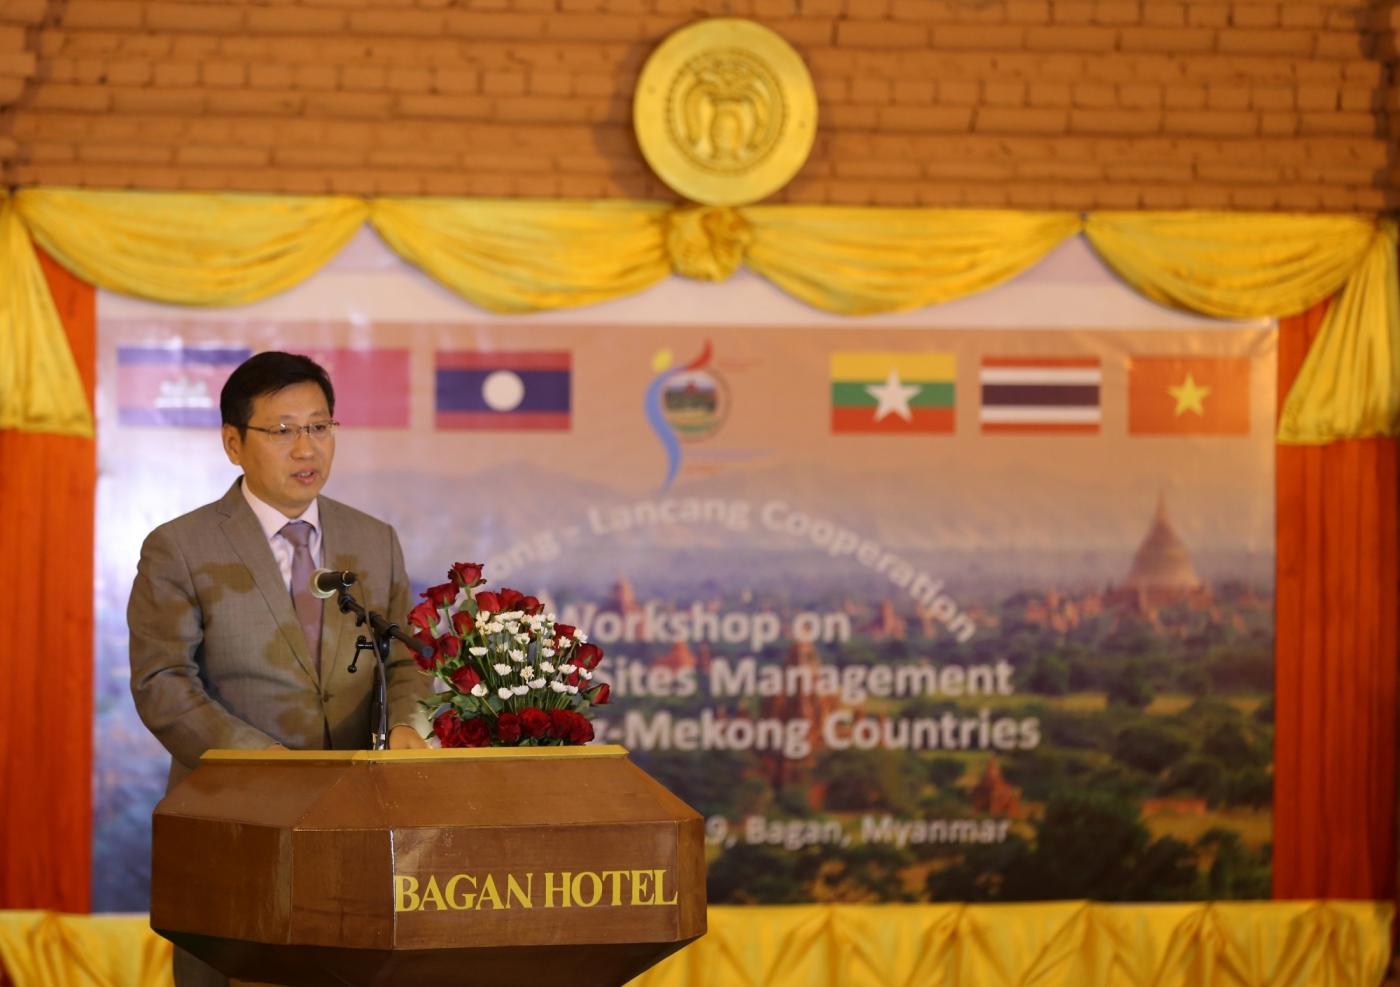 BAGAN, Feb. 20, 2019 (Xinhua) -- Chinese Ambassador to Myanmar Hong Liang speaks during a workshop on heritage sites management in Lancang-Mekong countries in Bagan, Myanmar, Feb. 20, 2019. Myanmar hosted a two-day workshop on heritage sites management in Lancang-Mekong countries in its ancient city of Bagan on Wednesday.The workshop featured extensive discussions and view exchanges of representatives from six Lancang-Mekong countries -- China, Cambodia, Laos, Myanmar, Vietnam and Thailand. (Xinhua/U Aung/IANS) by .